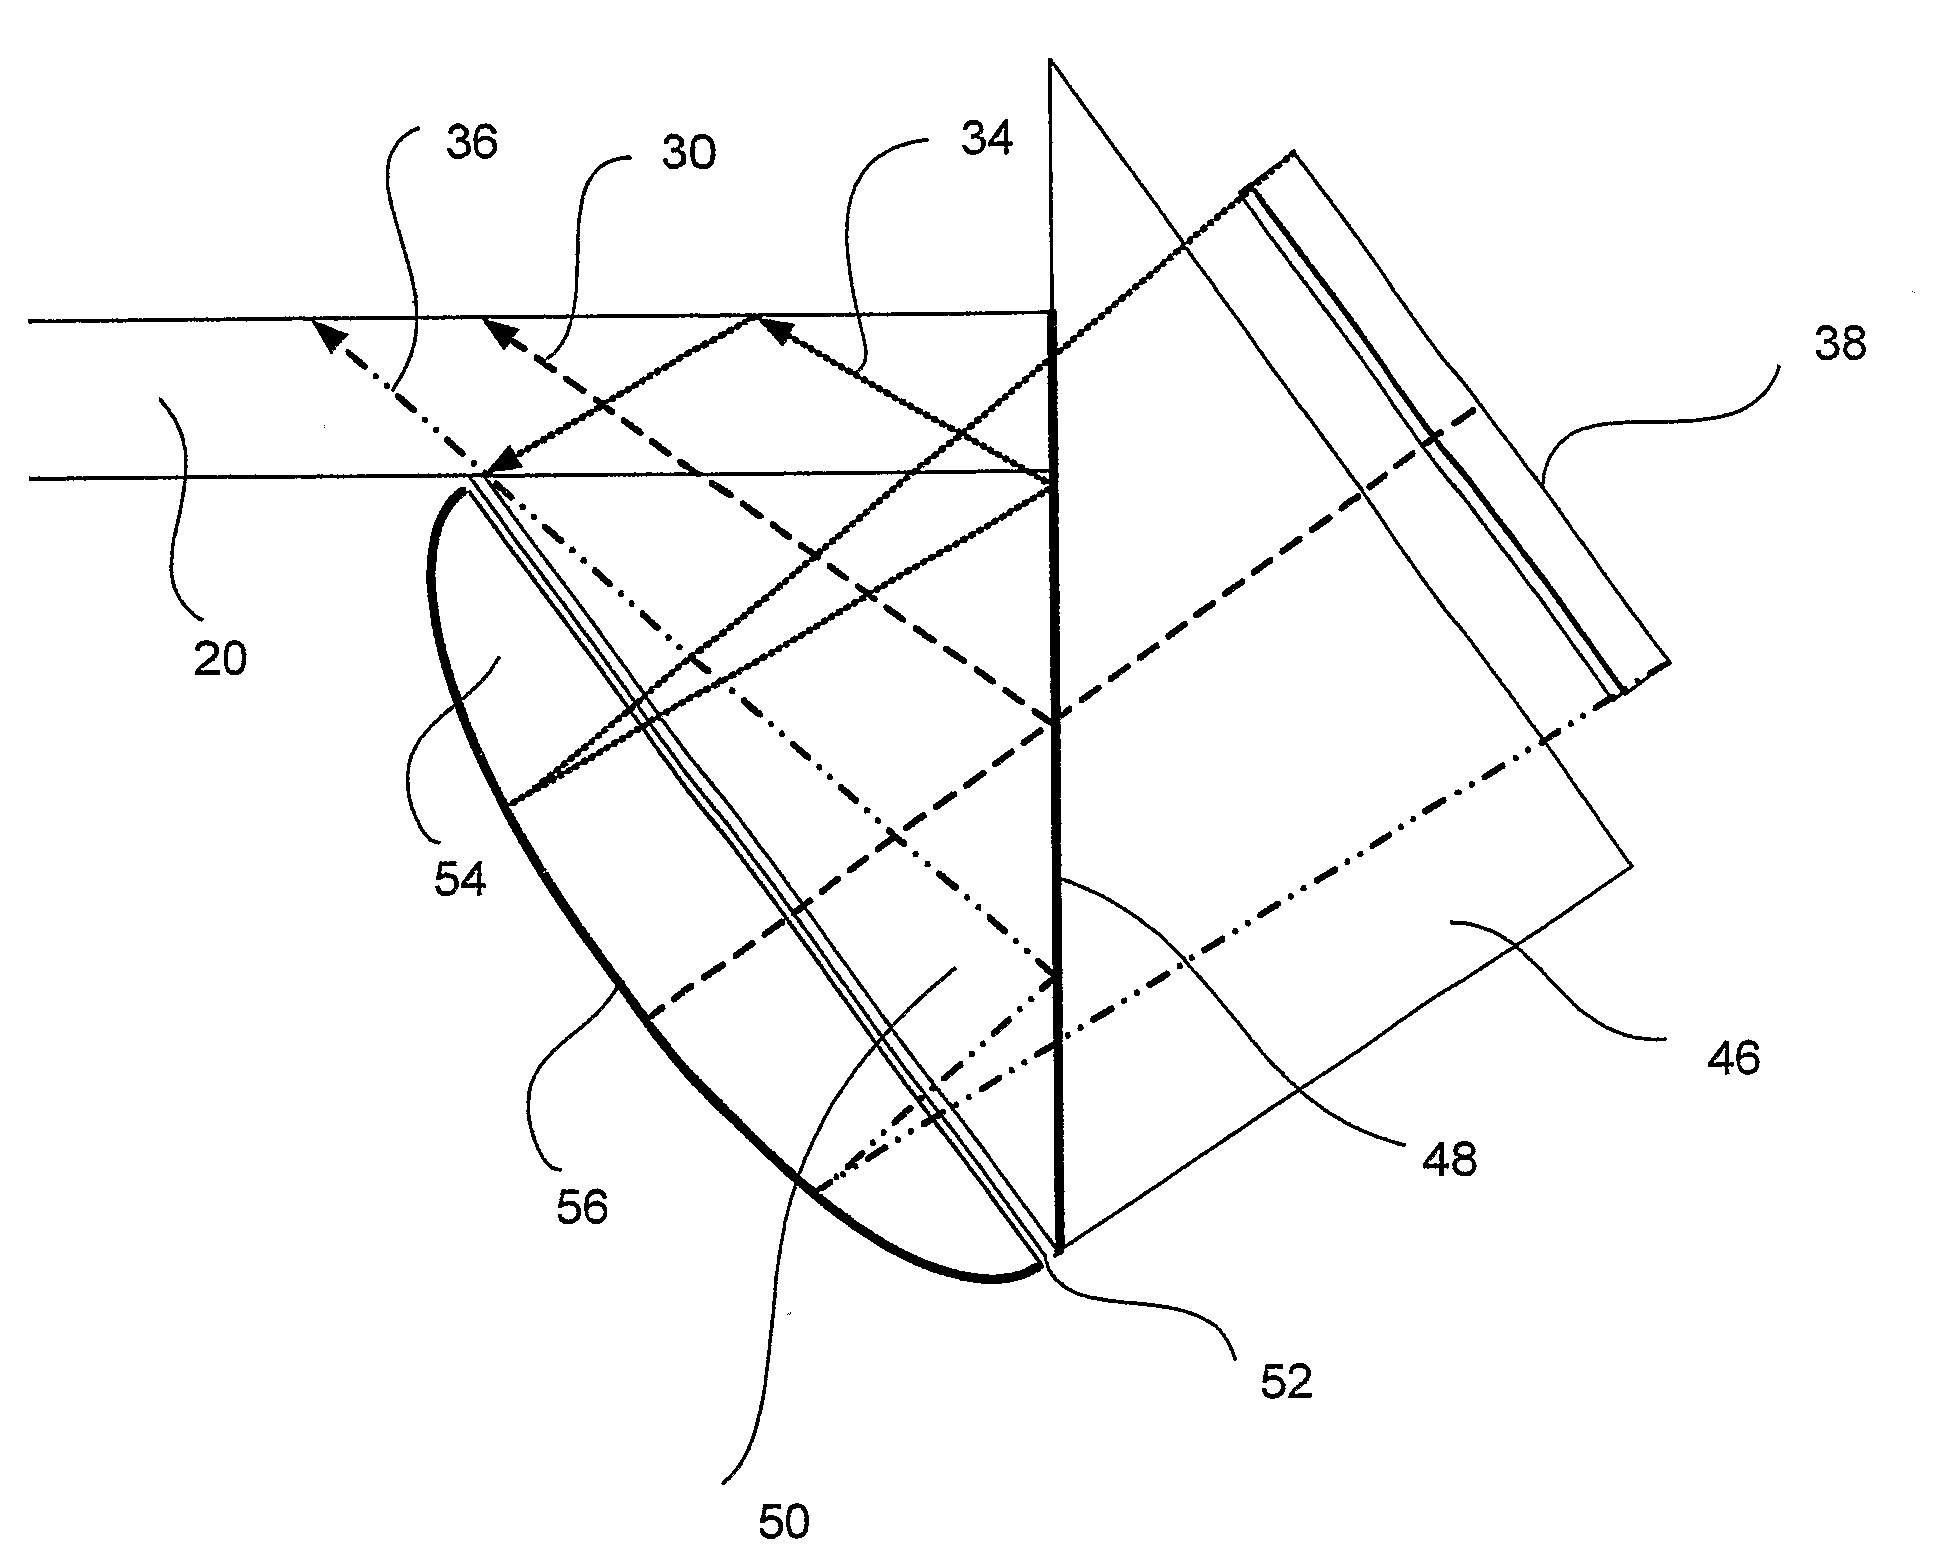 Substrate-guided optical device